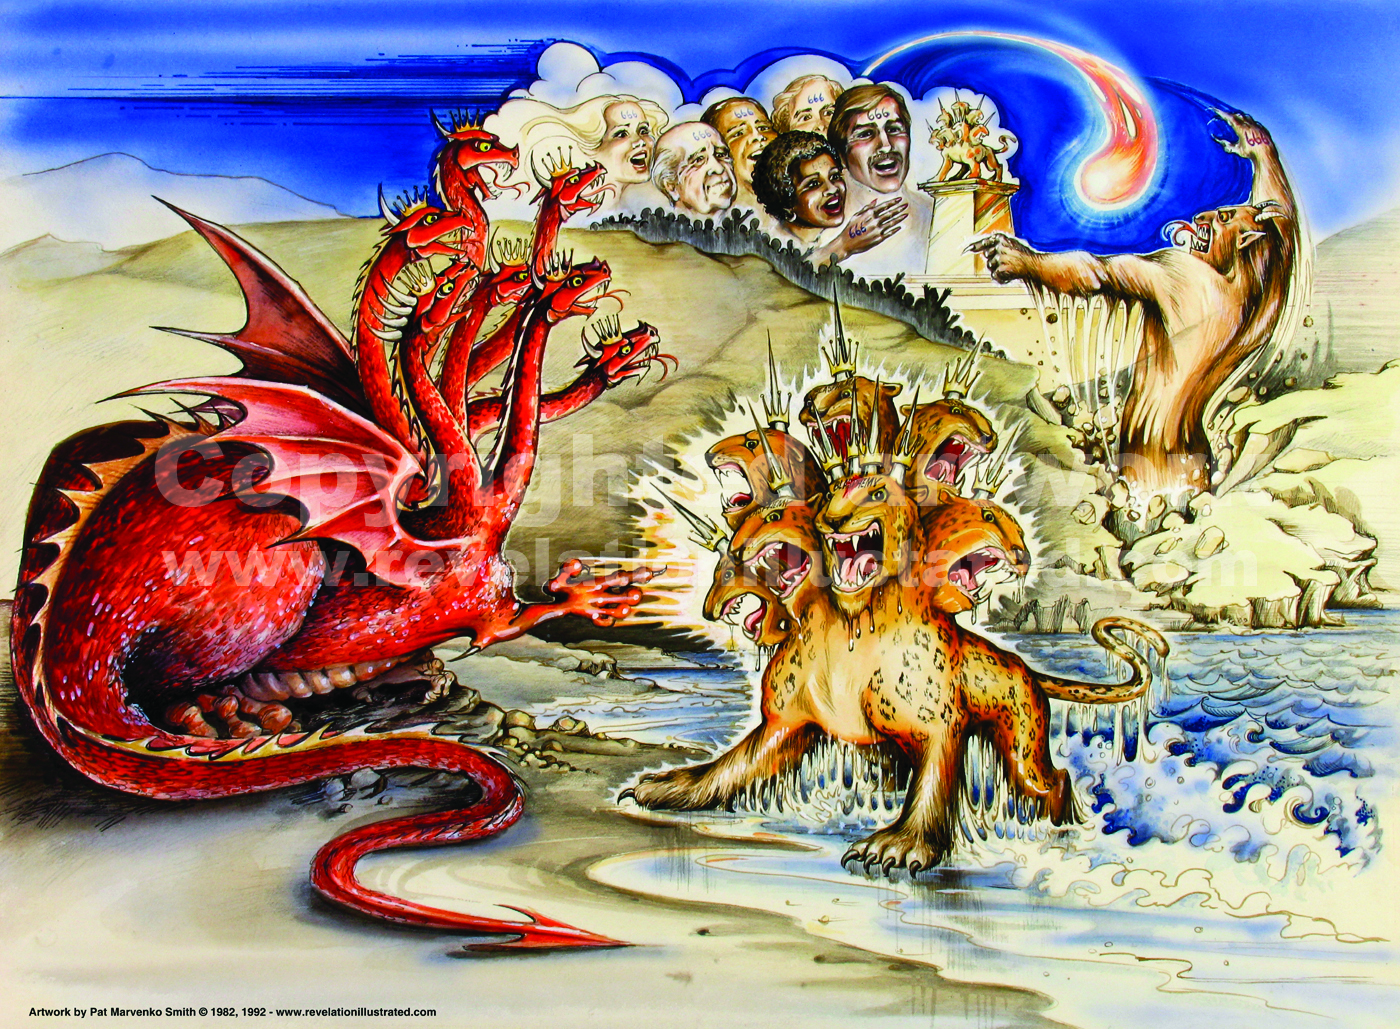 The Three Beasts and 666 Image Download - Revelation Productions